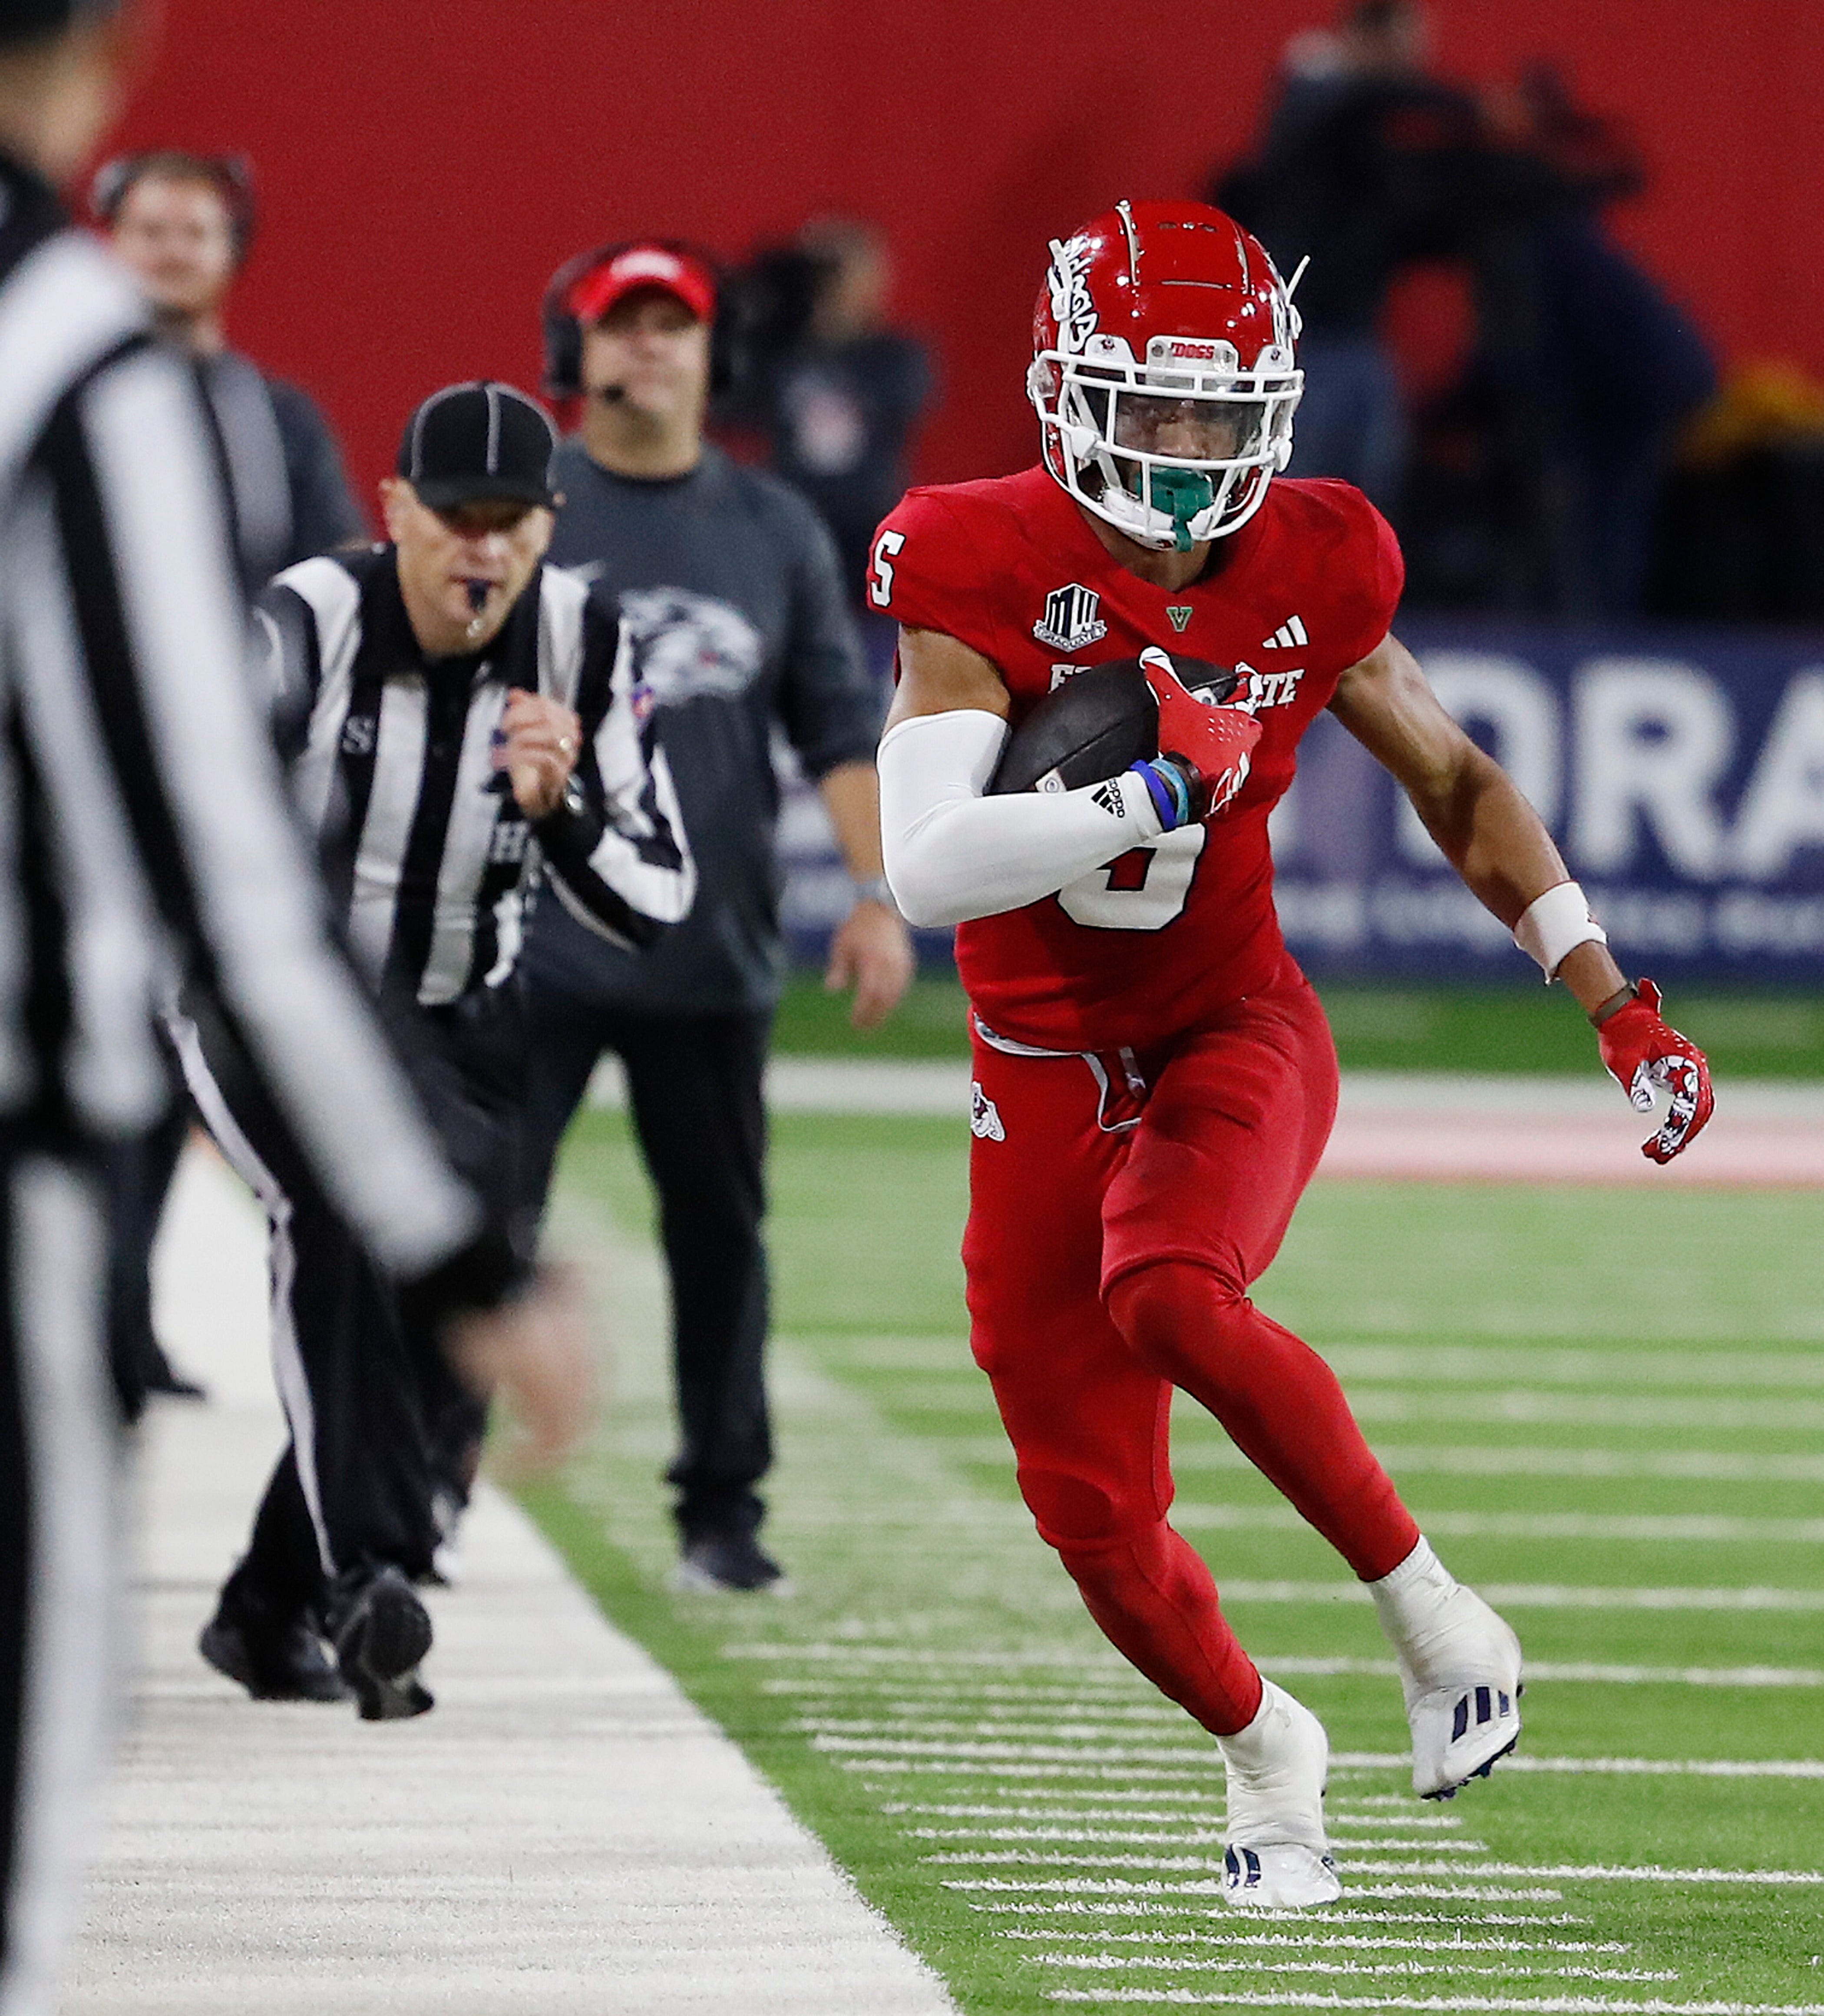 'I'm blessed': Westerville South graduate Jaelen Gill signs with Los Angeles Chargers